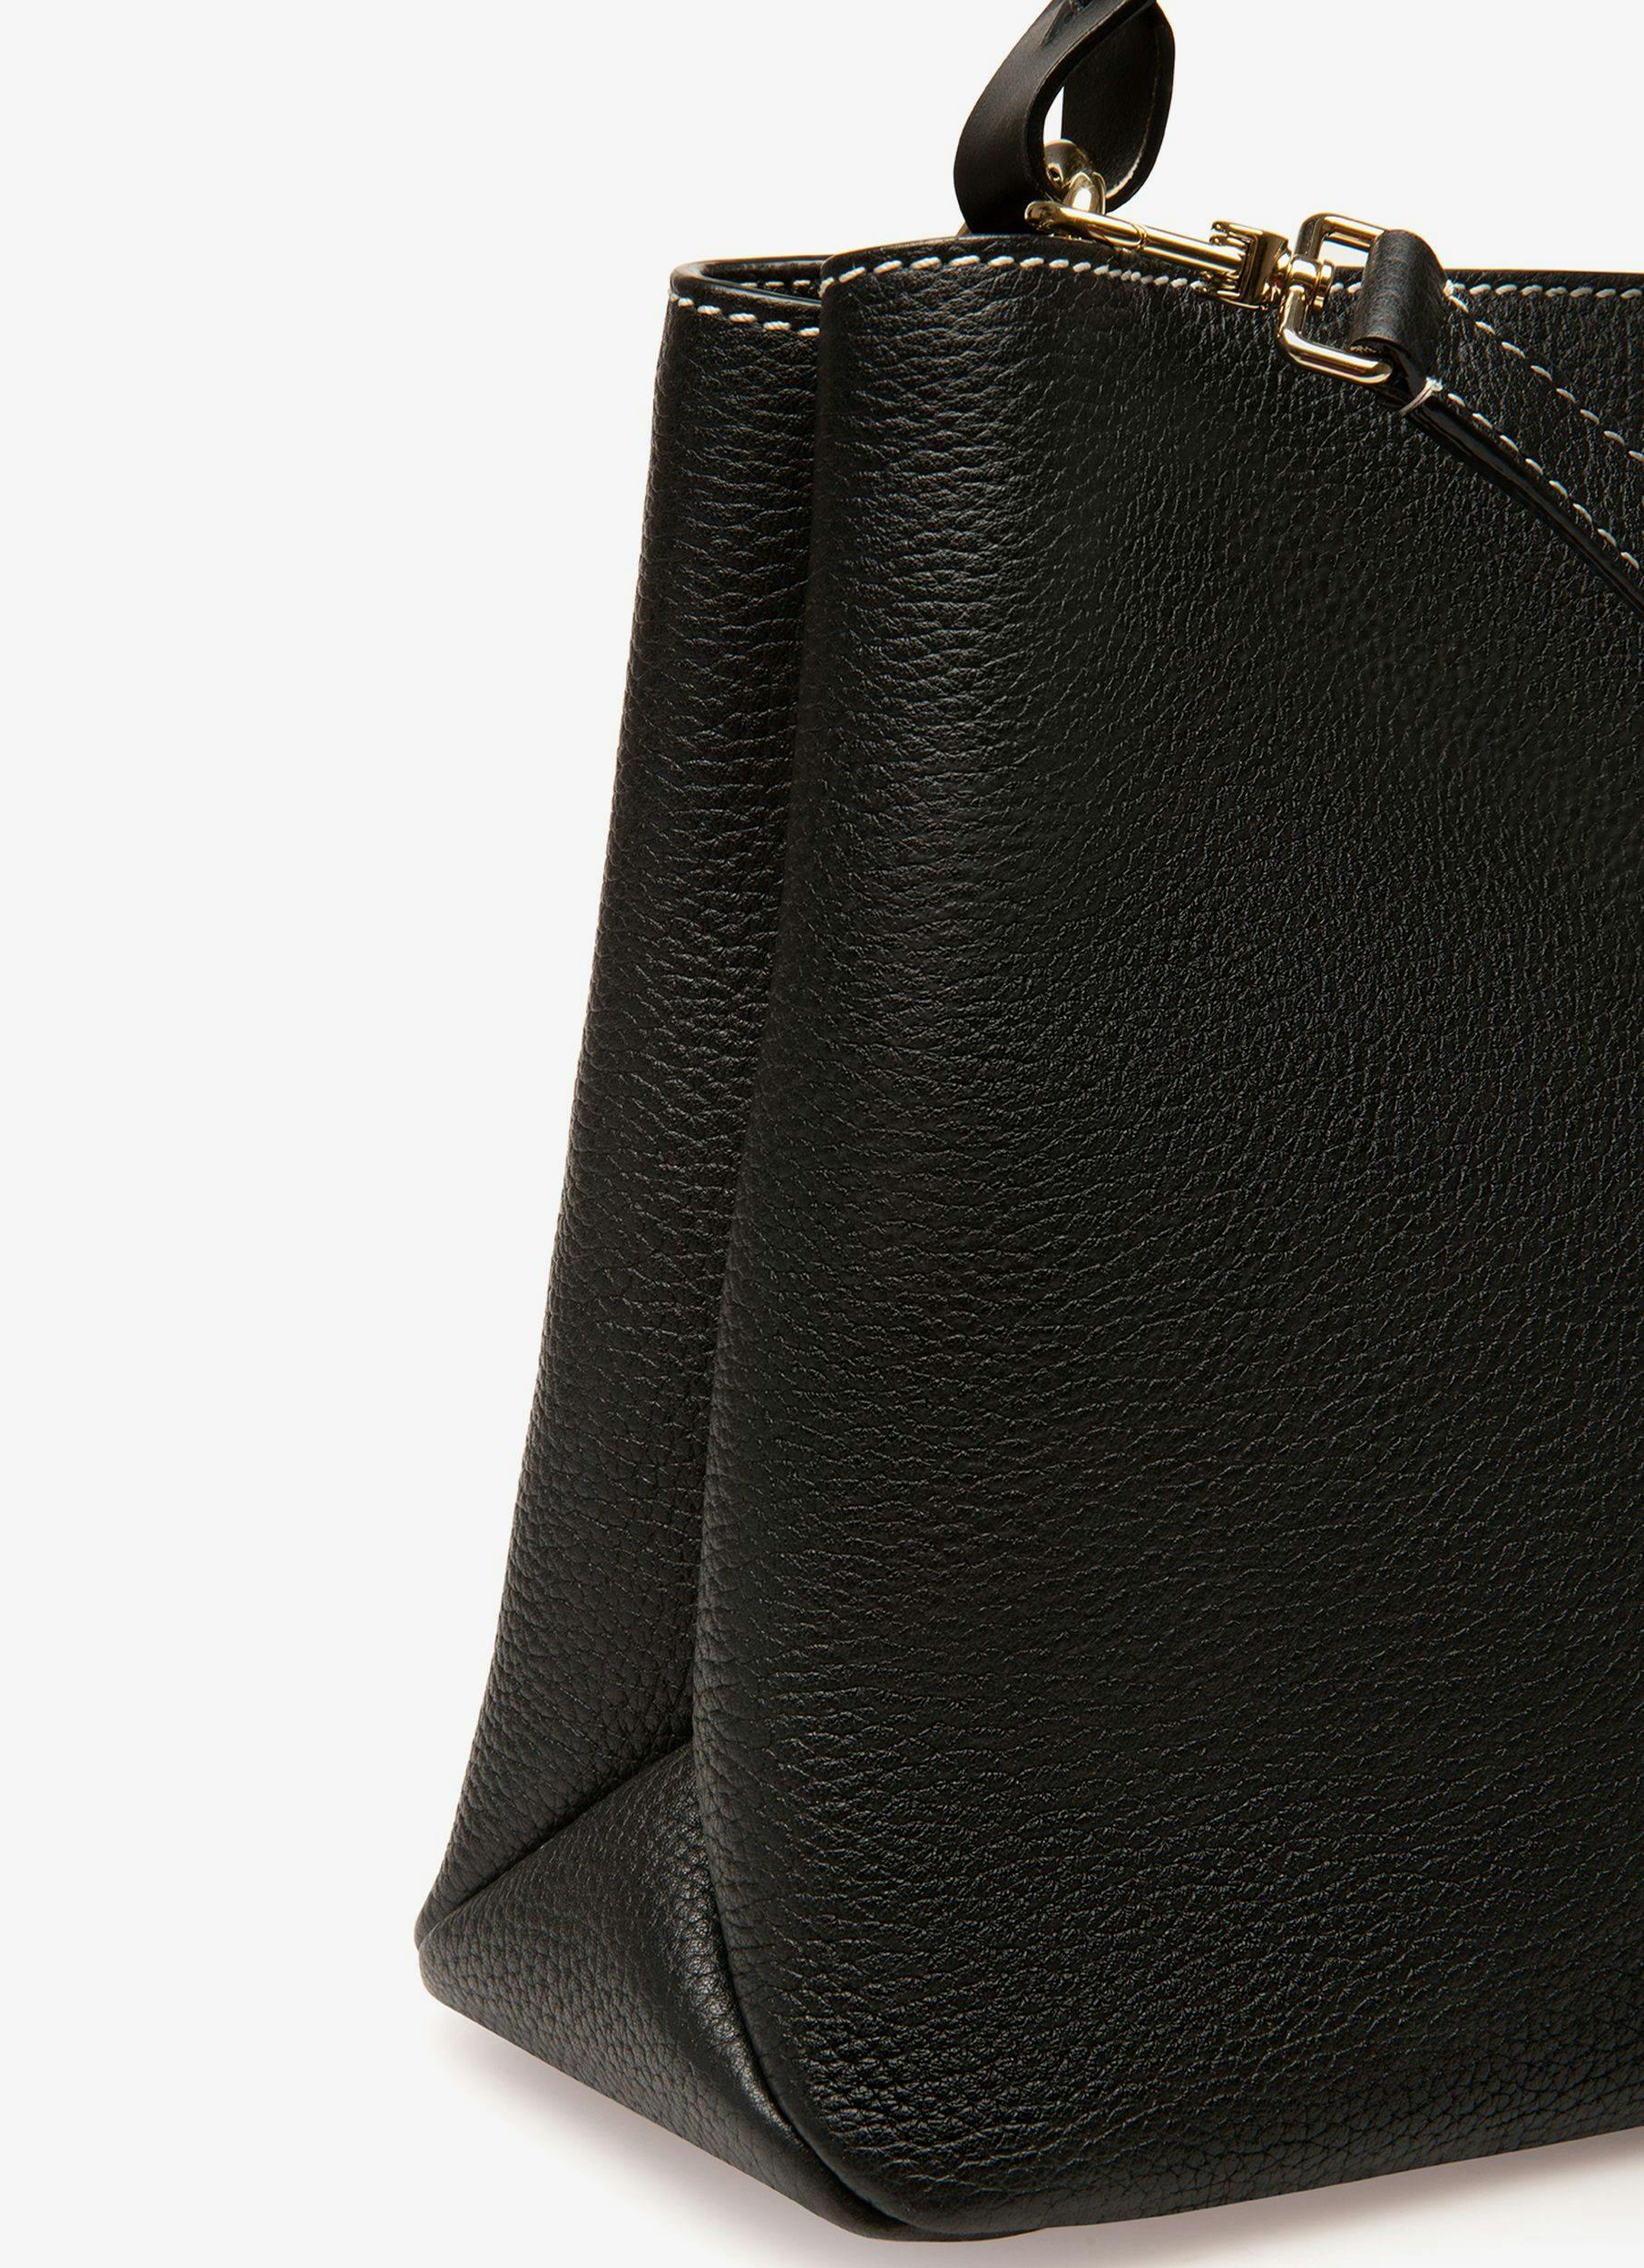 Lucyle Leather Shoulder Bag In Black - Women's - Bally - 05